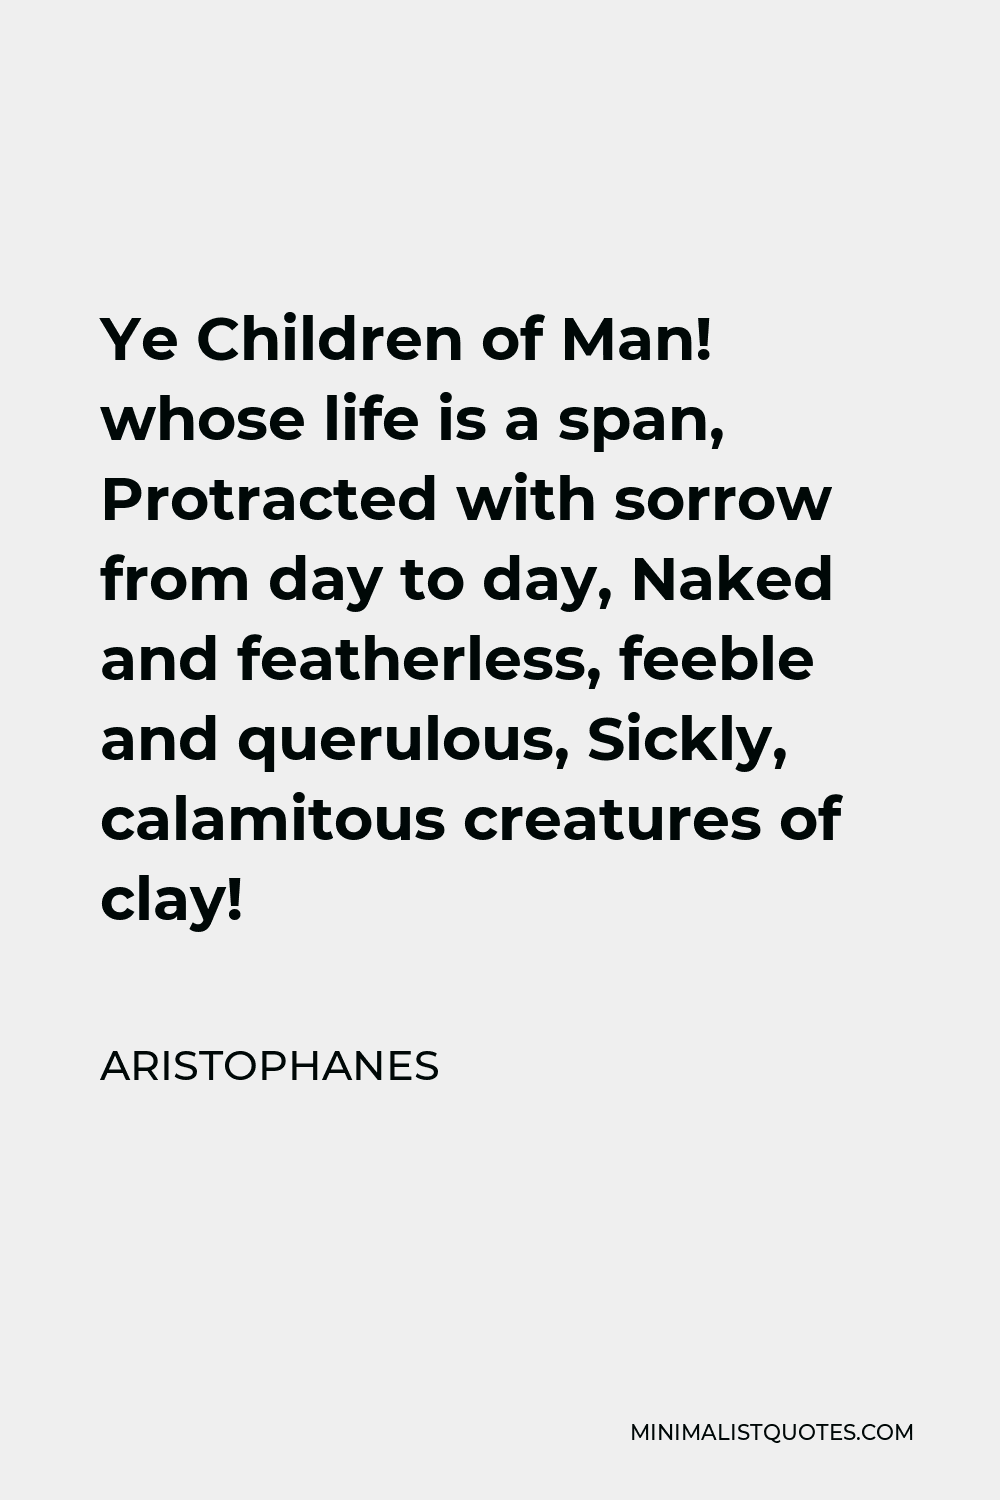 Aristophanes Quote - Ye Children of Man! whose life is a span, Protracted with sorrow from day to day, Naked and featherless, feeble and querulous, Sickly, calamitous creatures of clay!